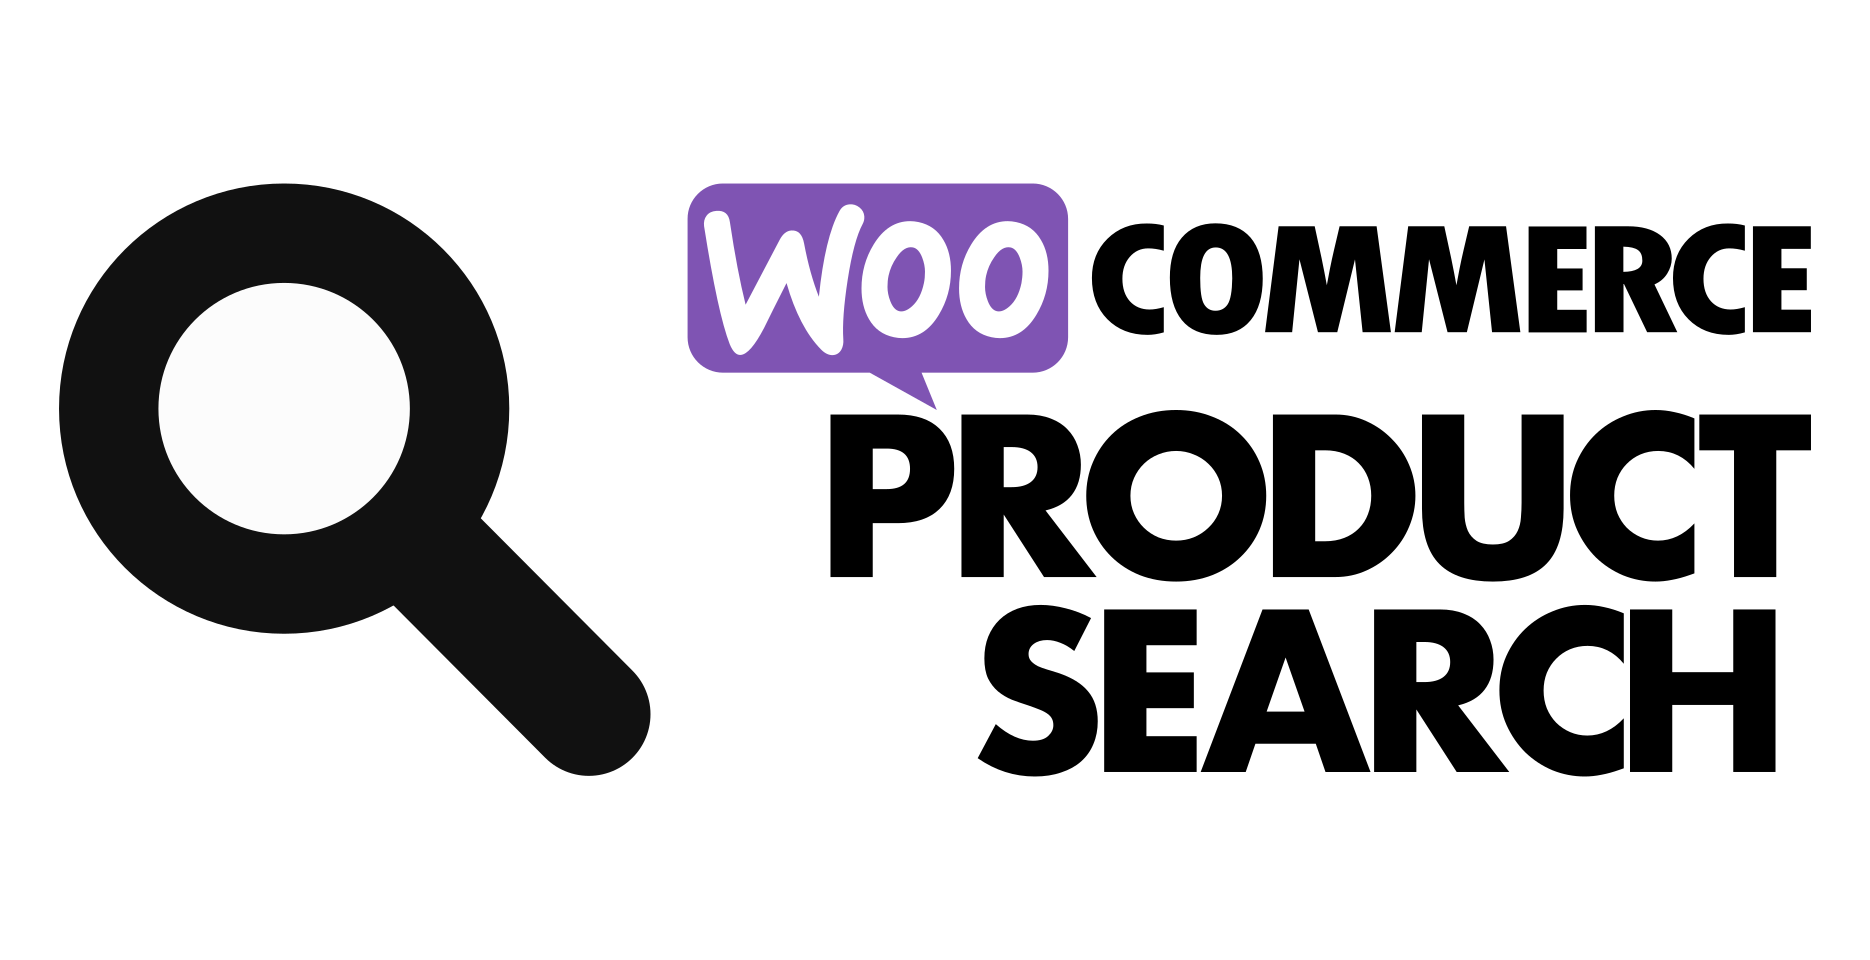 WooCommerce Product Search - WooCommerce Product Search v5.4.0 by Woocommerce Nulled Free Download